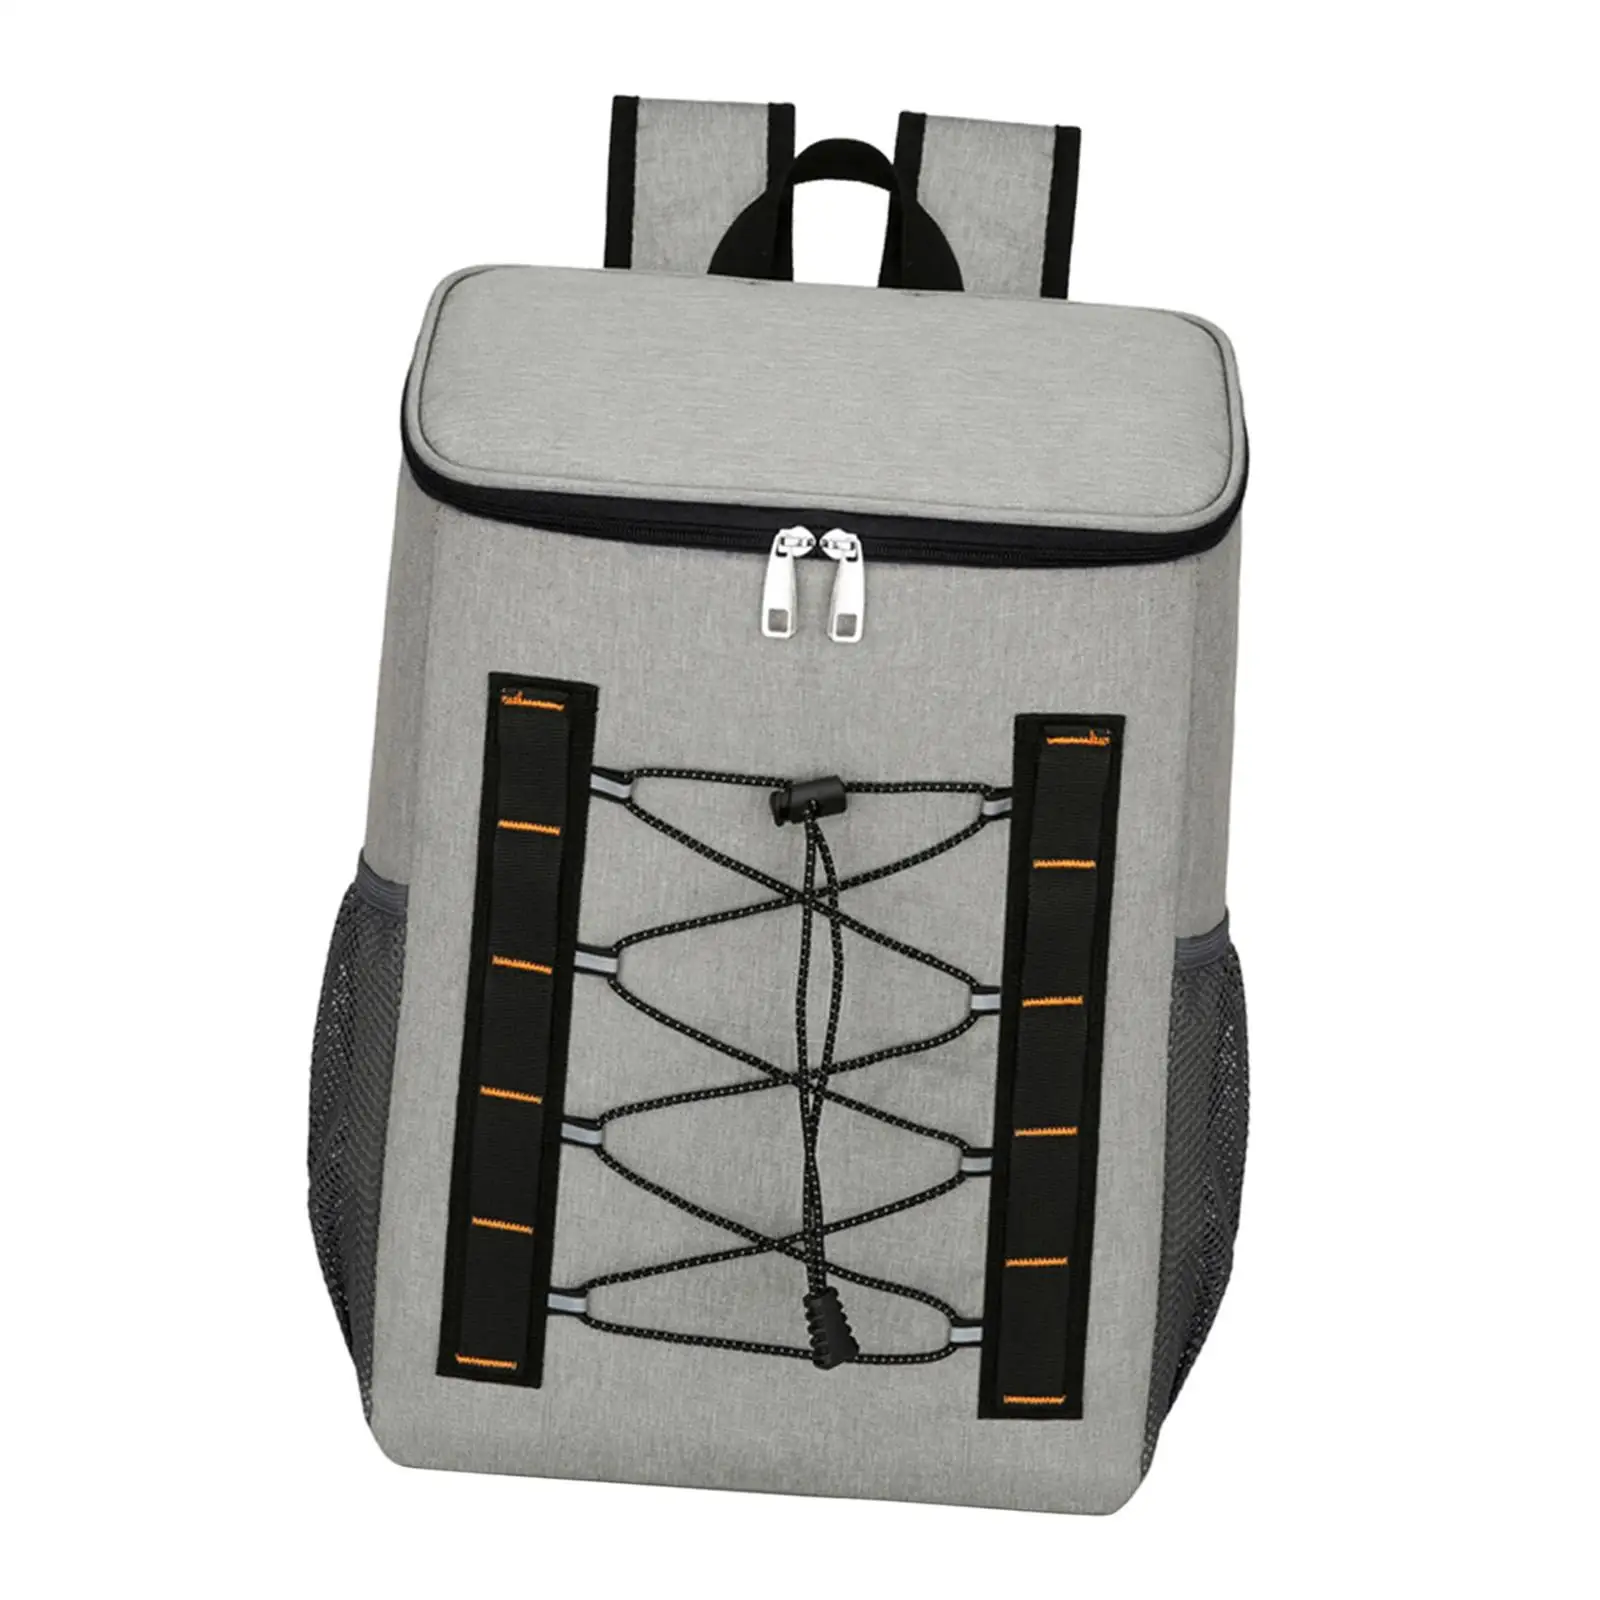 Outdoor Picnic Bag Picnic Warm Insulated Bag Multifunctional Refrigerated Backpack Large Thermal Bag for Travel Beach Lunch